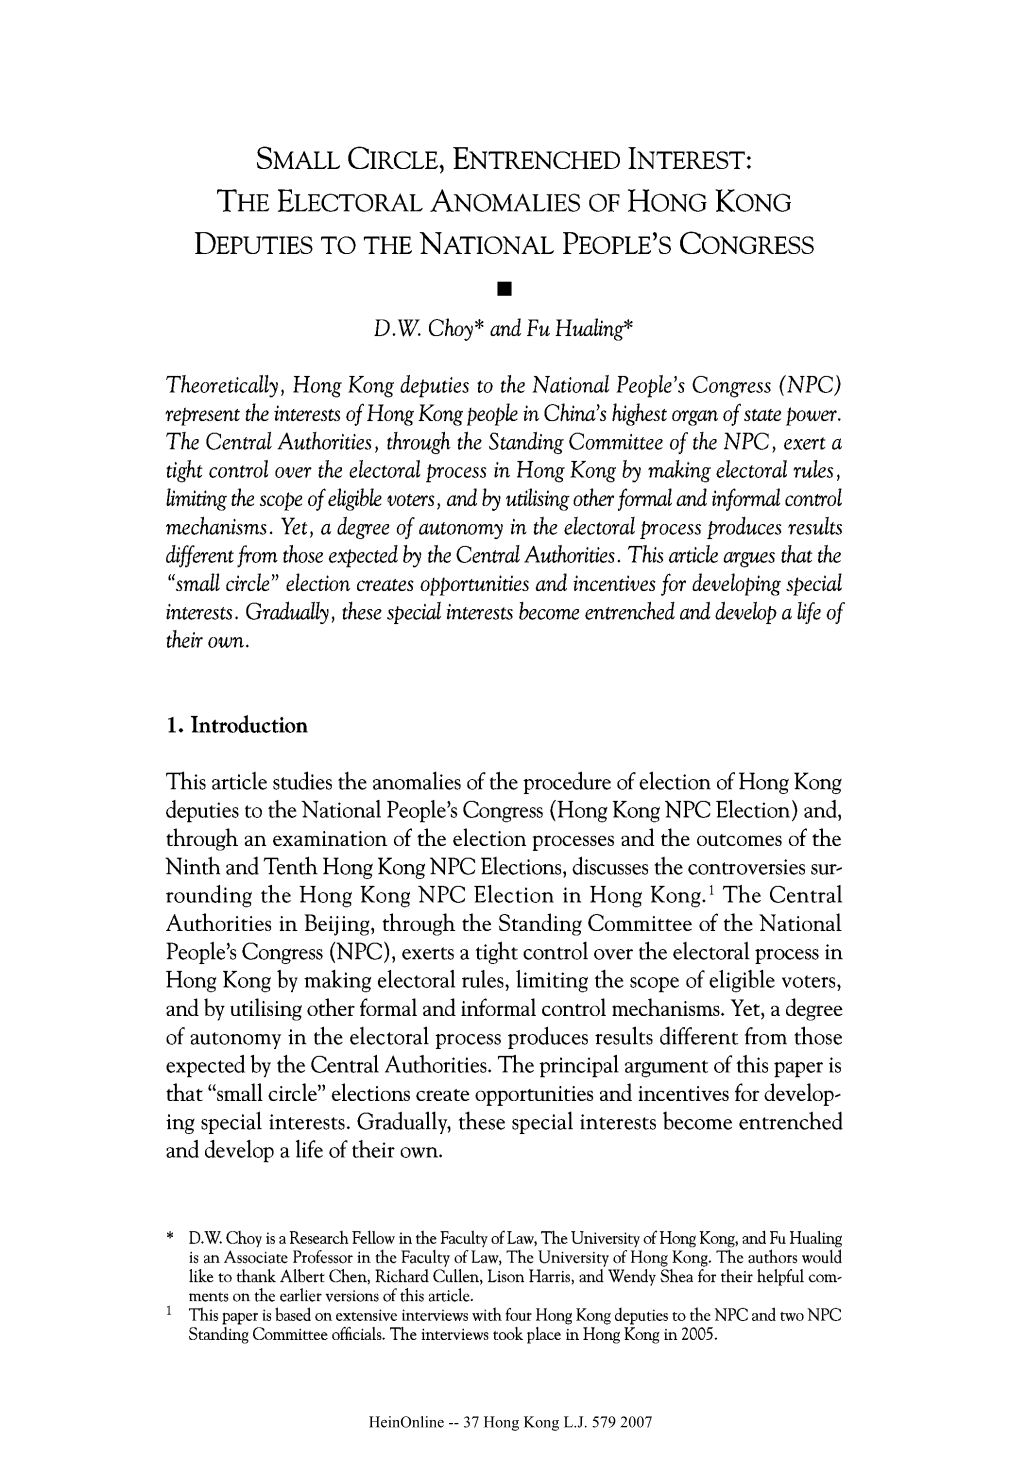 Small Circle, Entrenched Interest: the Electoral Anomalies of Hong Kong Deputies to the National People's Congress